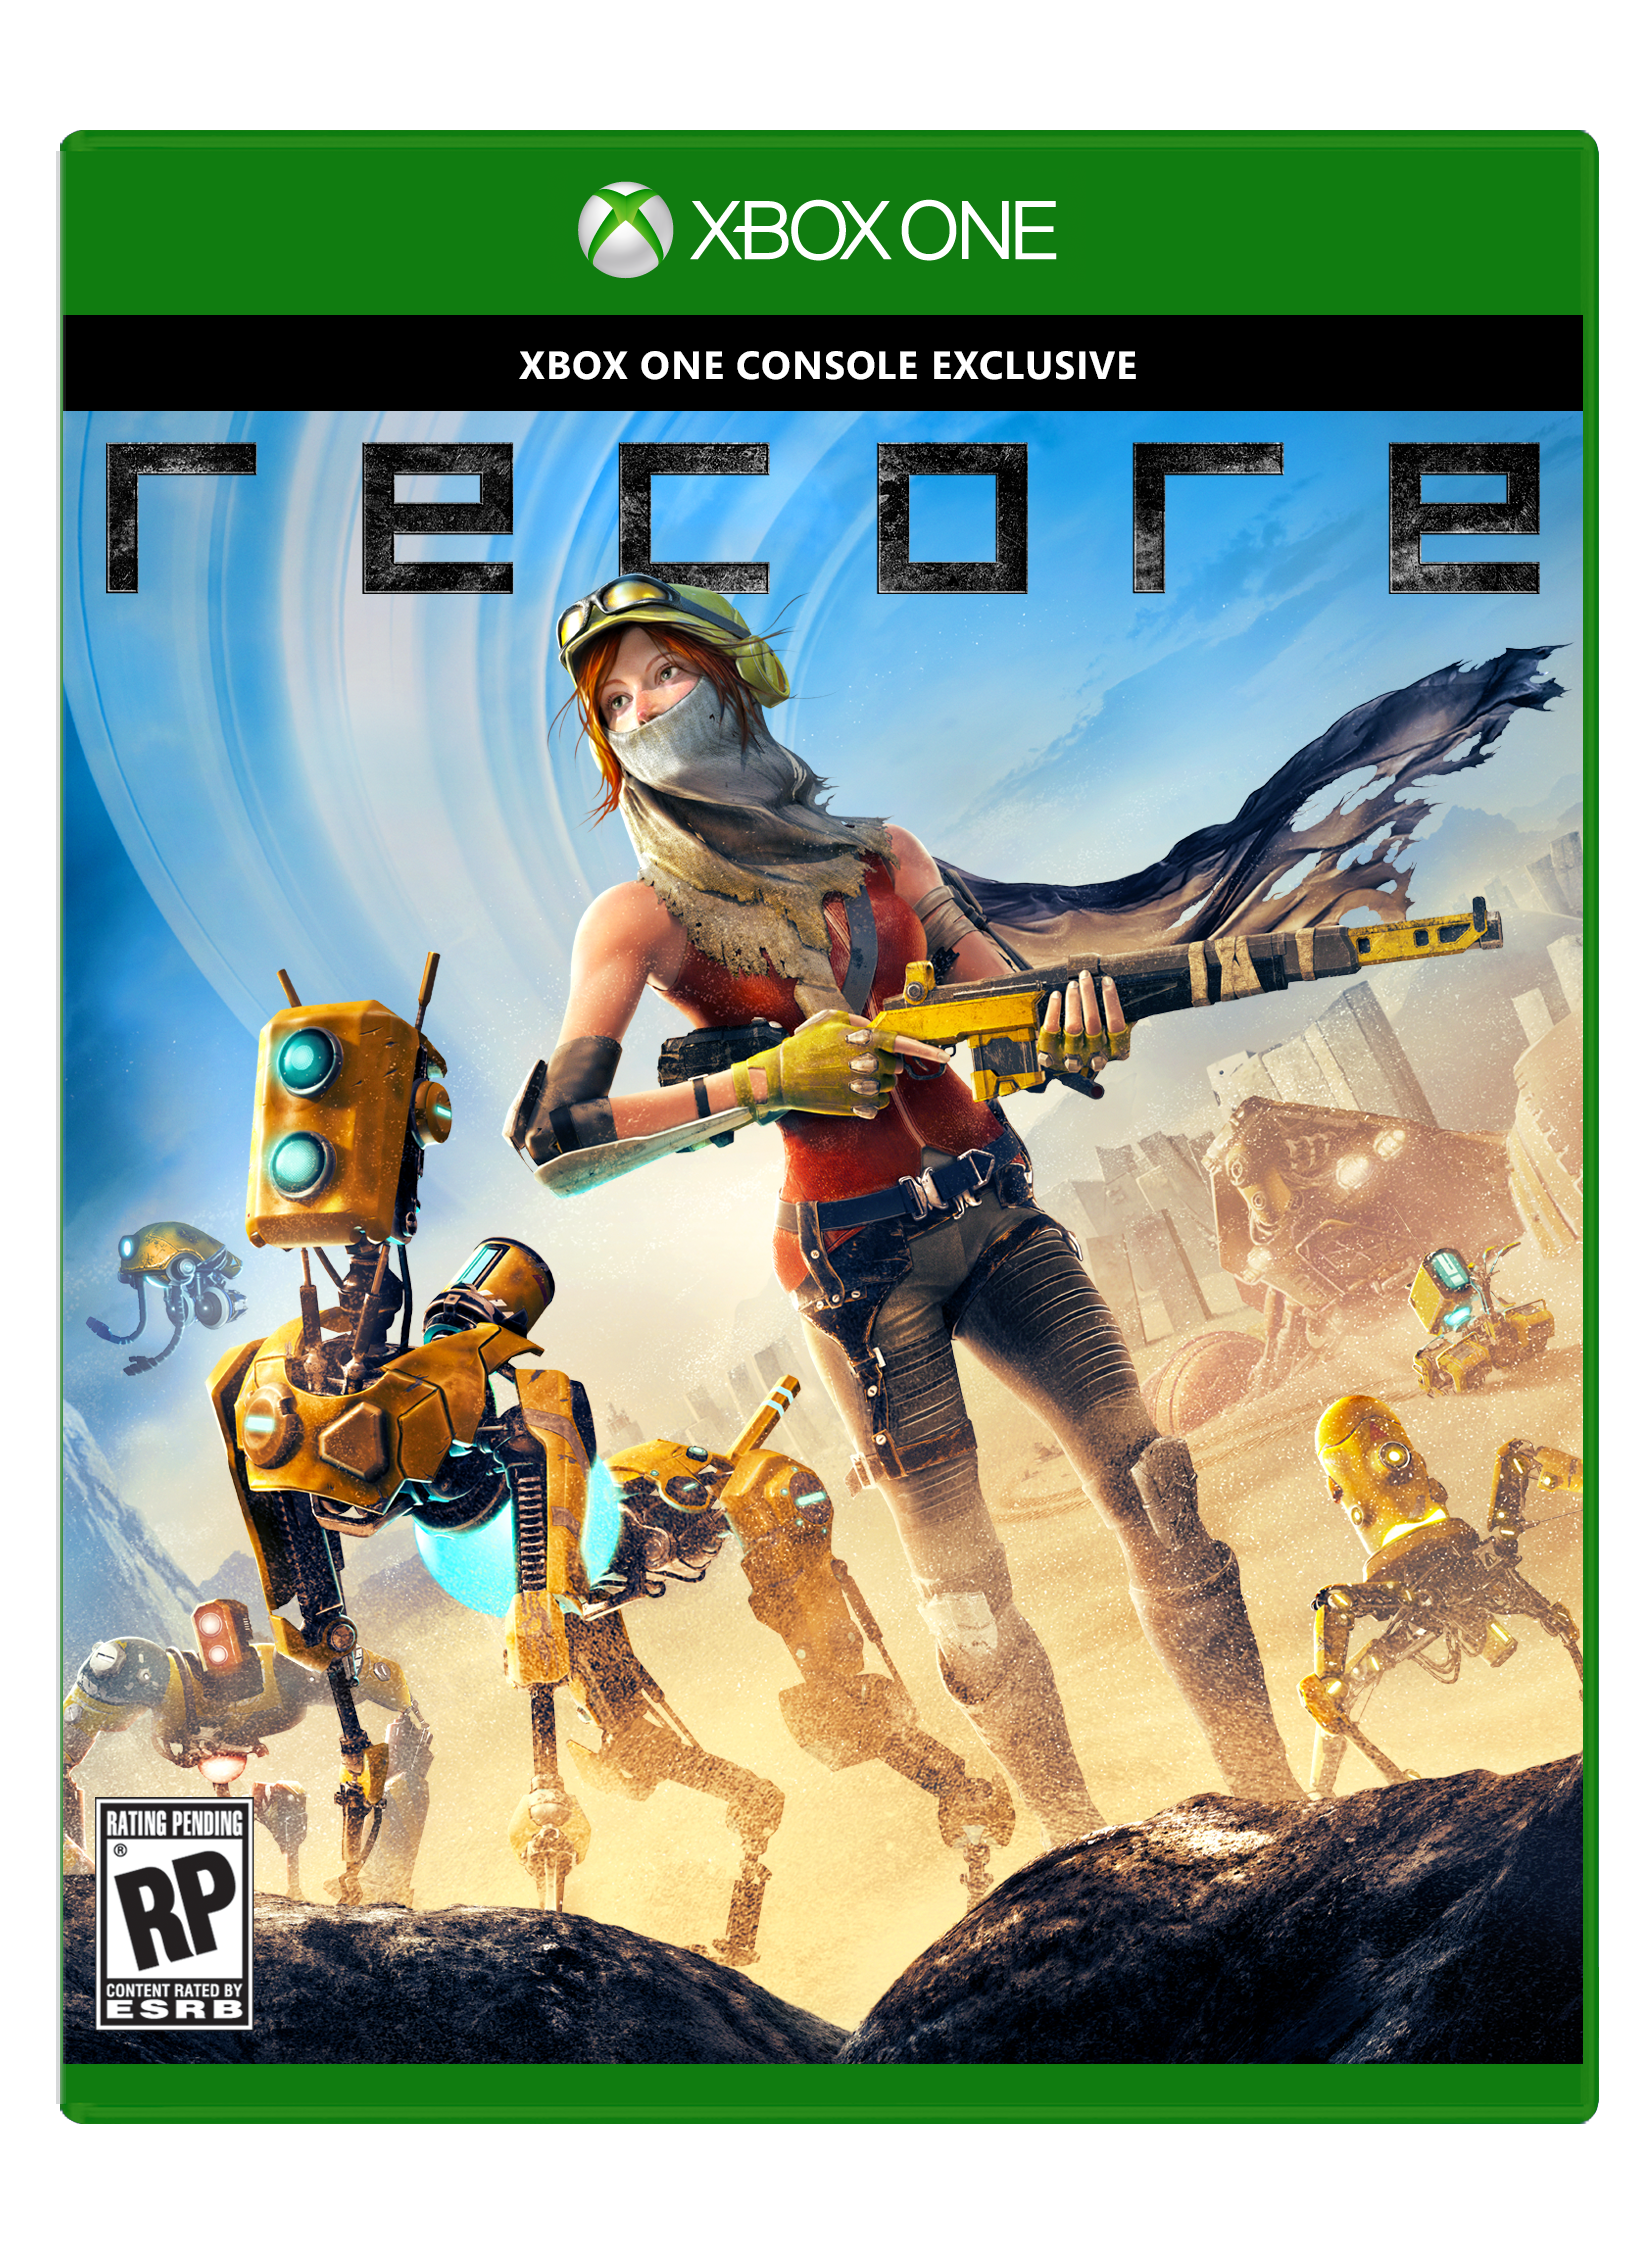 50 Weeks Later, Major Update Improves Flawed Xbox Exclusive ReCore